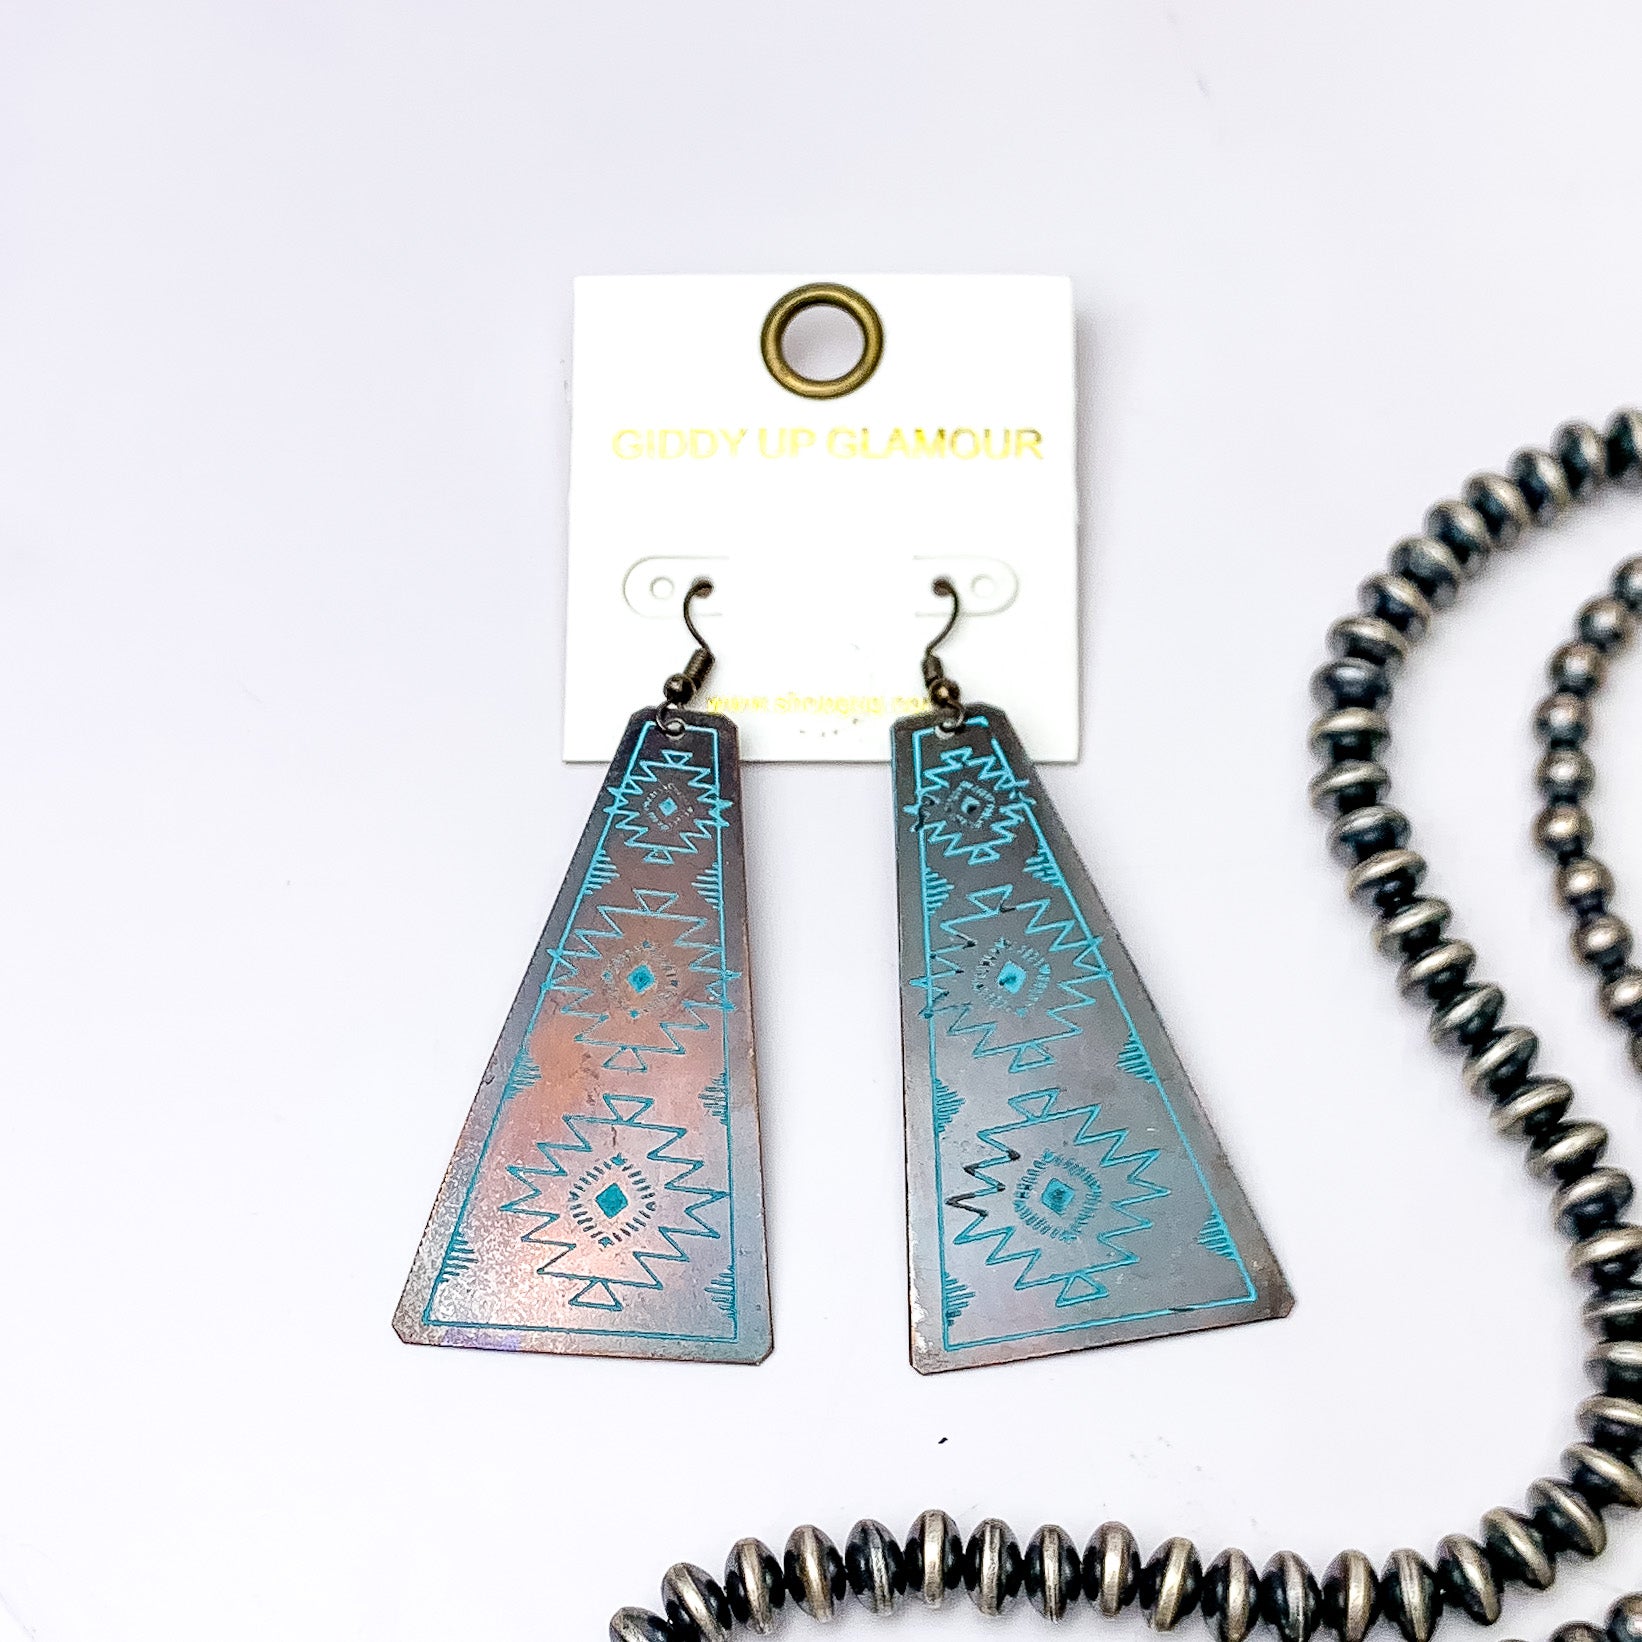 Aztec Tooled Earrings in Turquoise and Copper Tone. Pictured on a white background with beads to the right of the earrings for decoration.